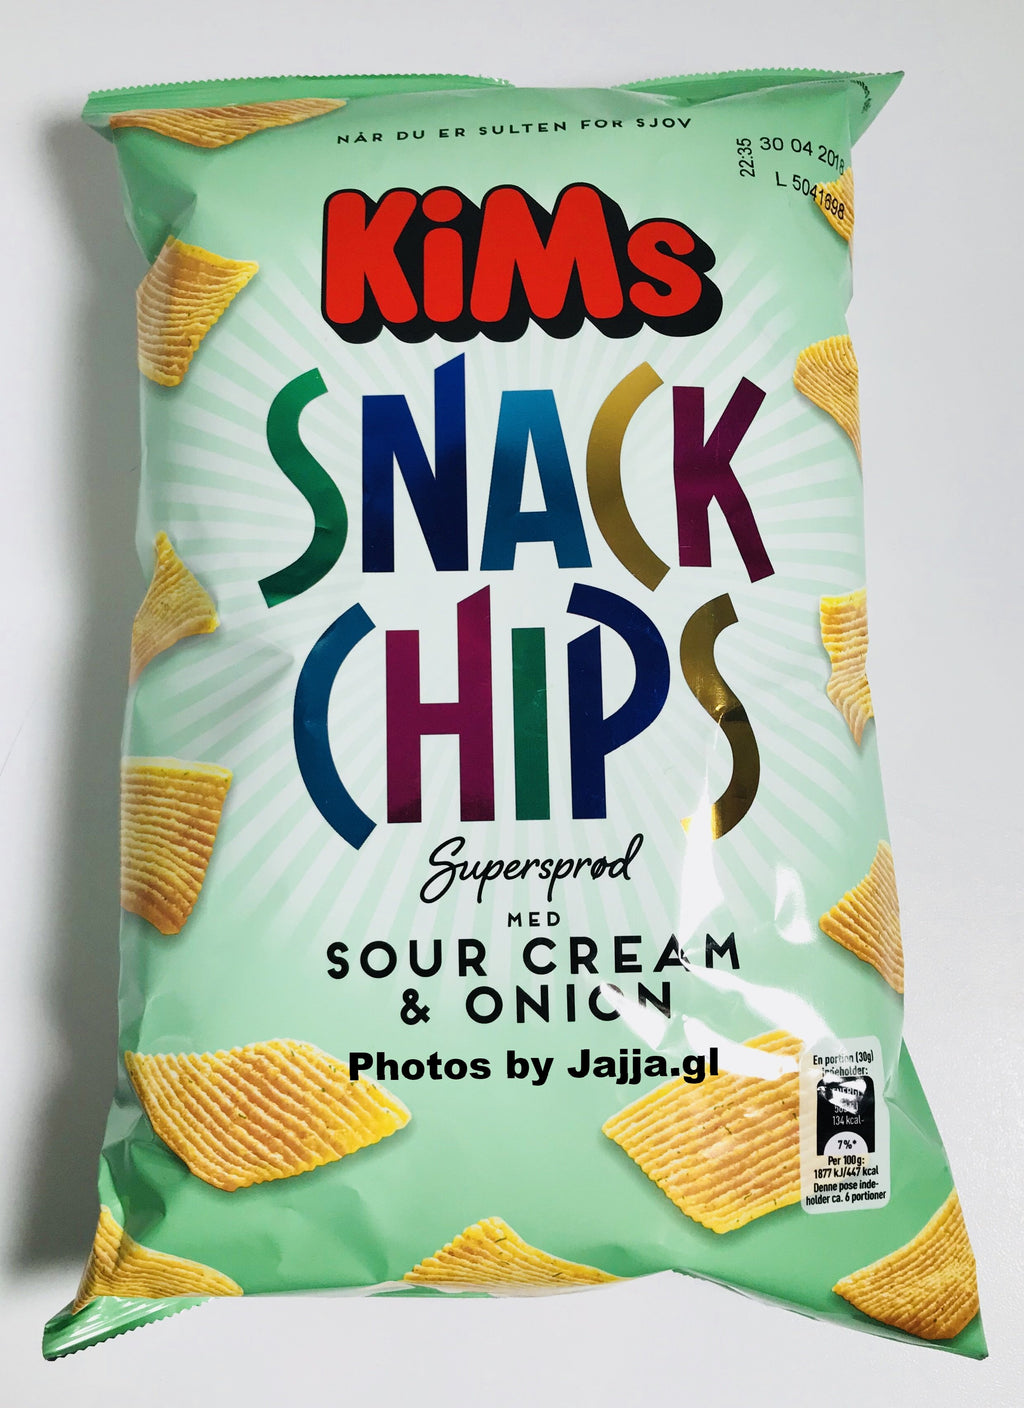 Kims - Snack Chips Sour Cream & Onion 160g